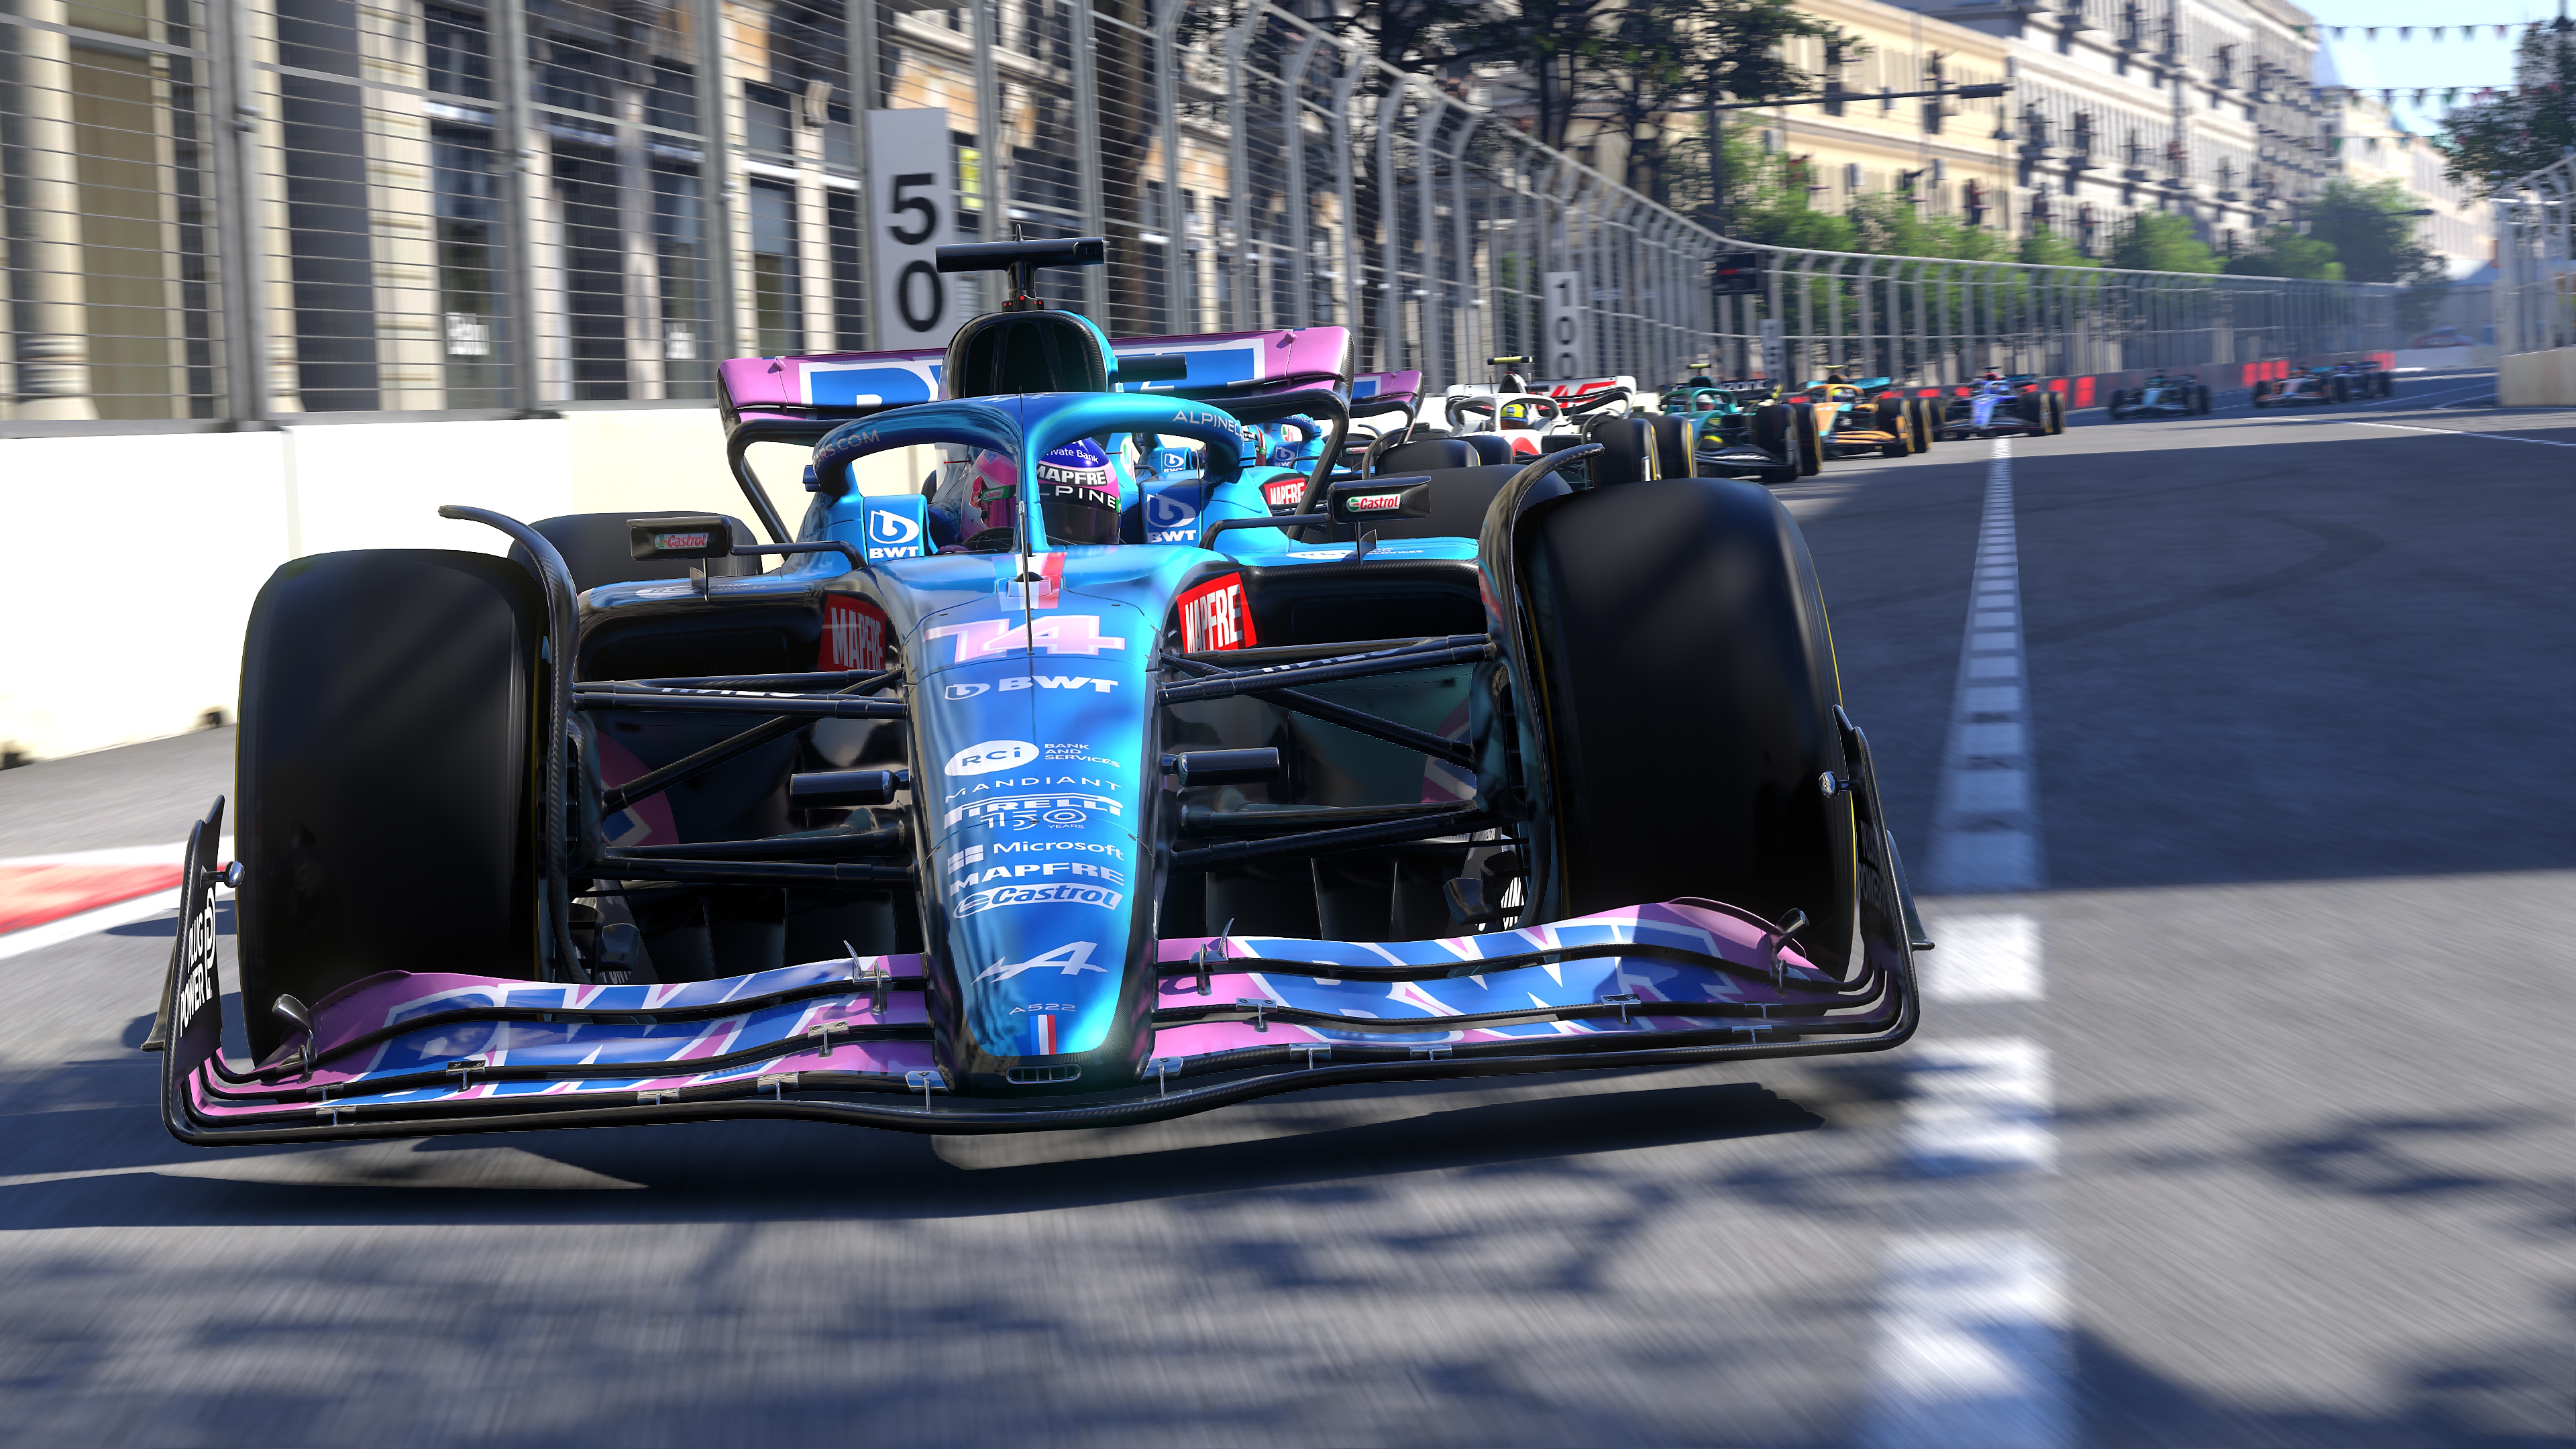 F1 22 screenshot showing an Alpine leading a line of cars